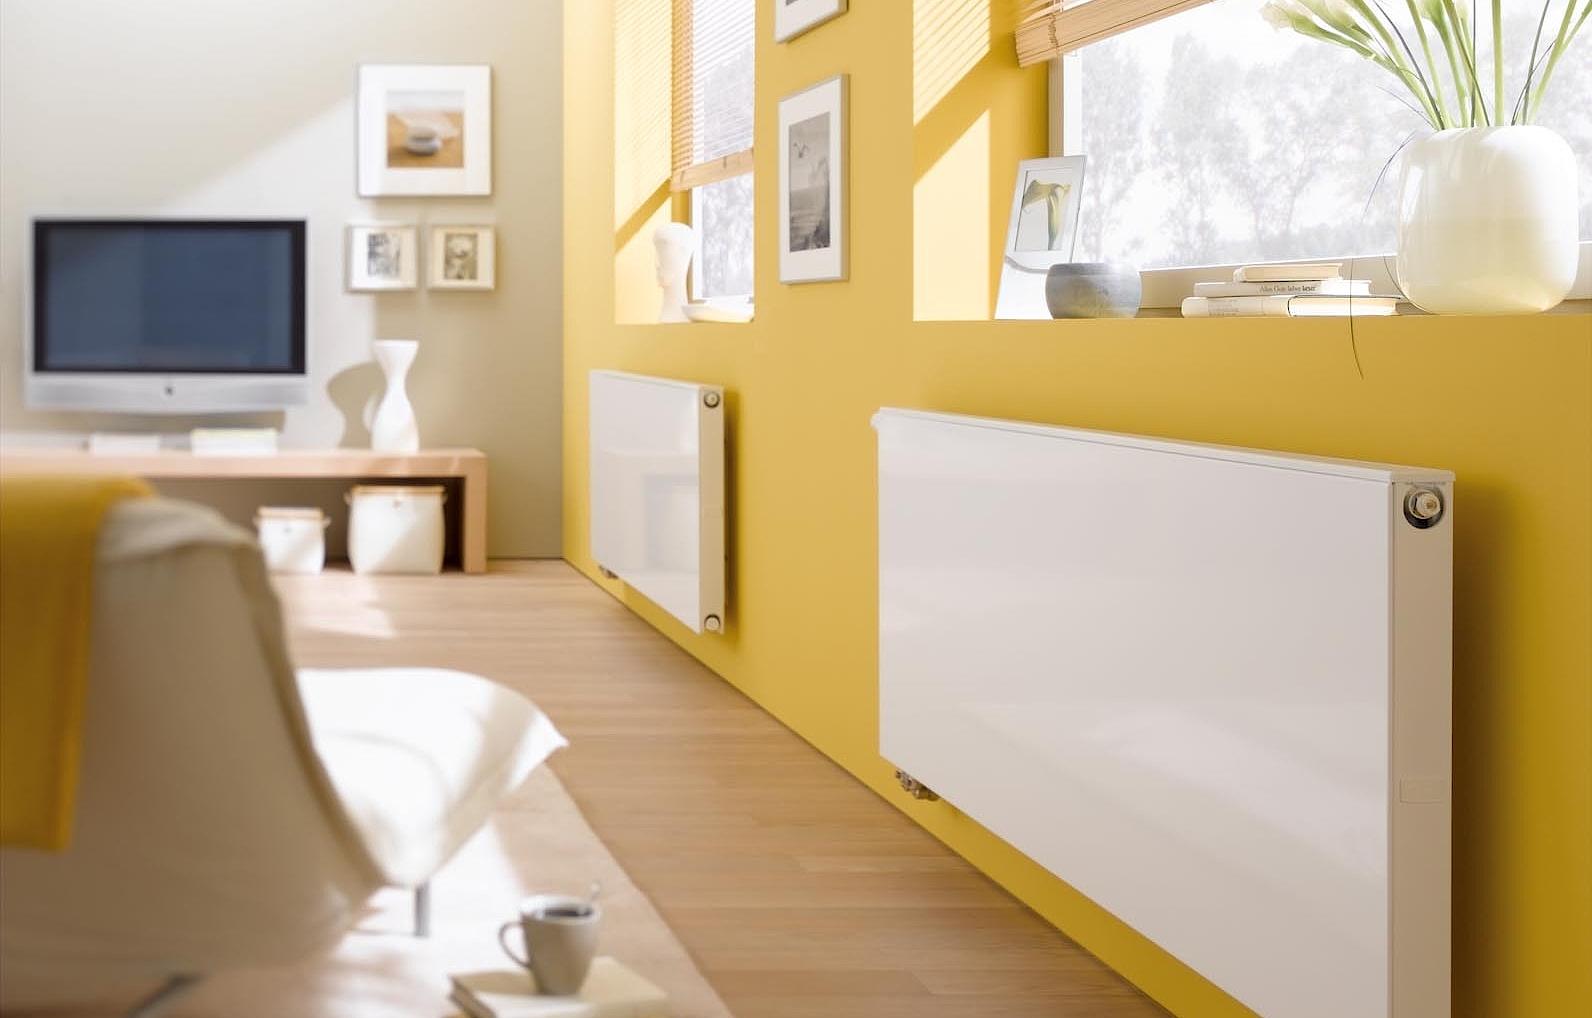 Kermi therm-x2 Plan steel panel radiators – powerful with a smooth design.